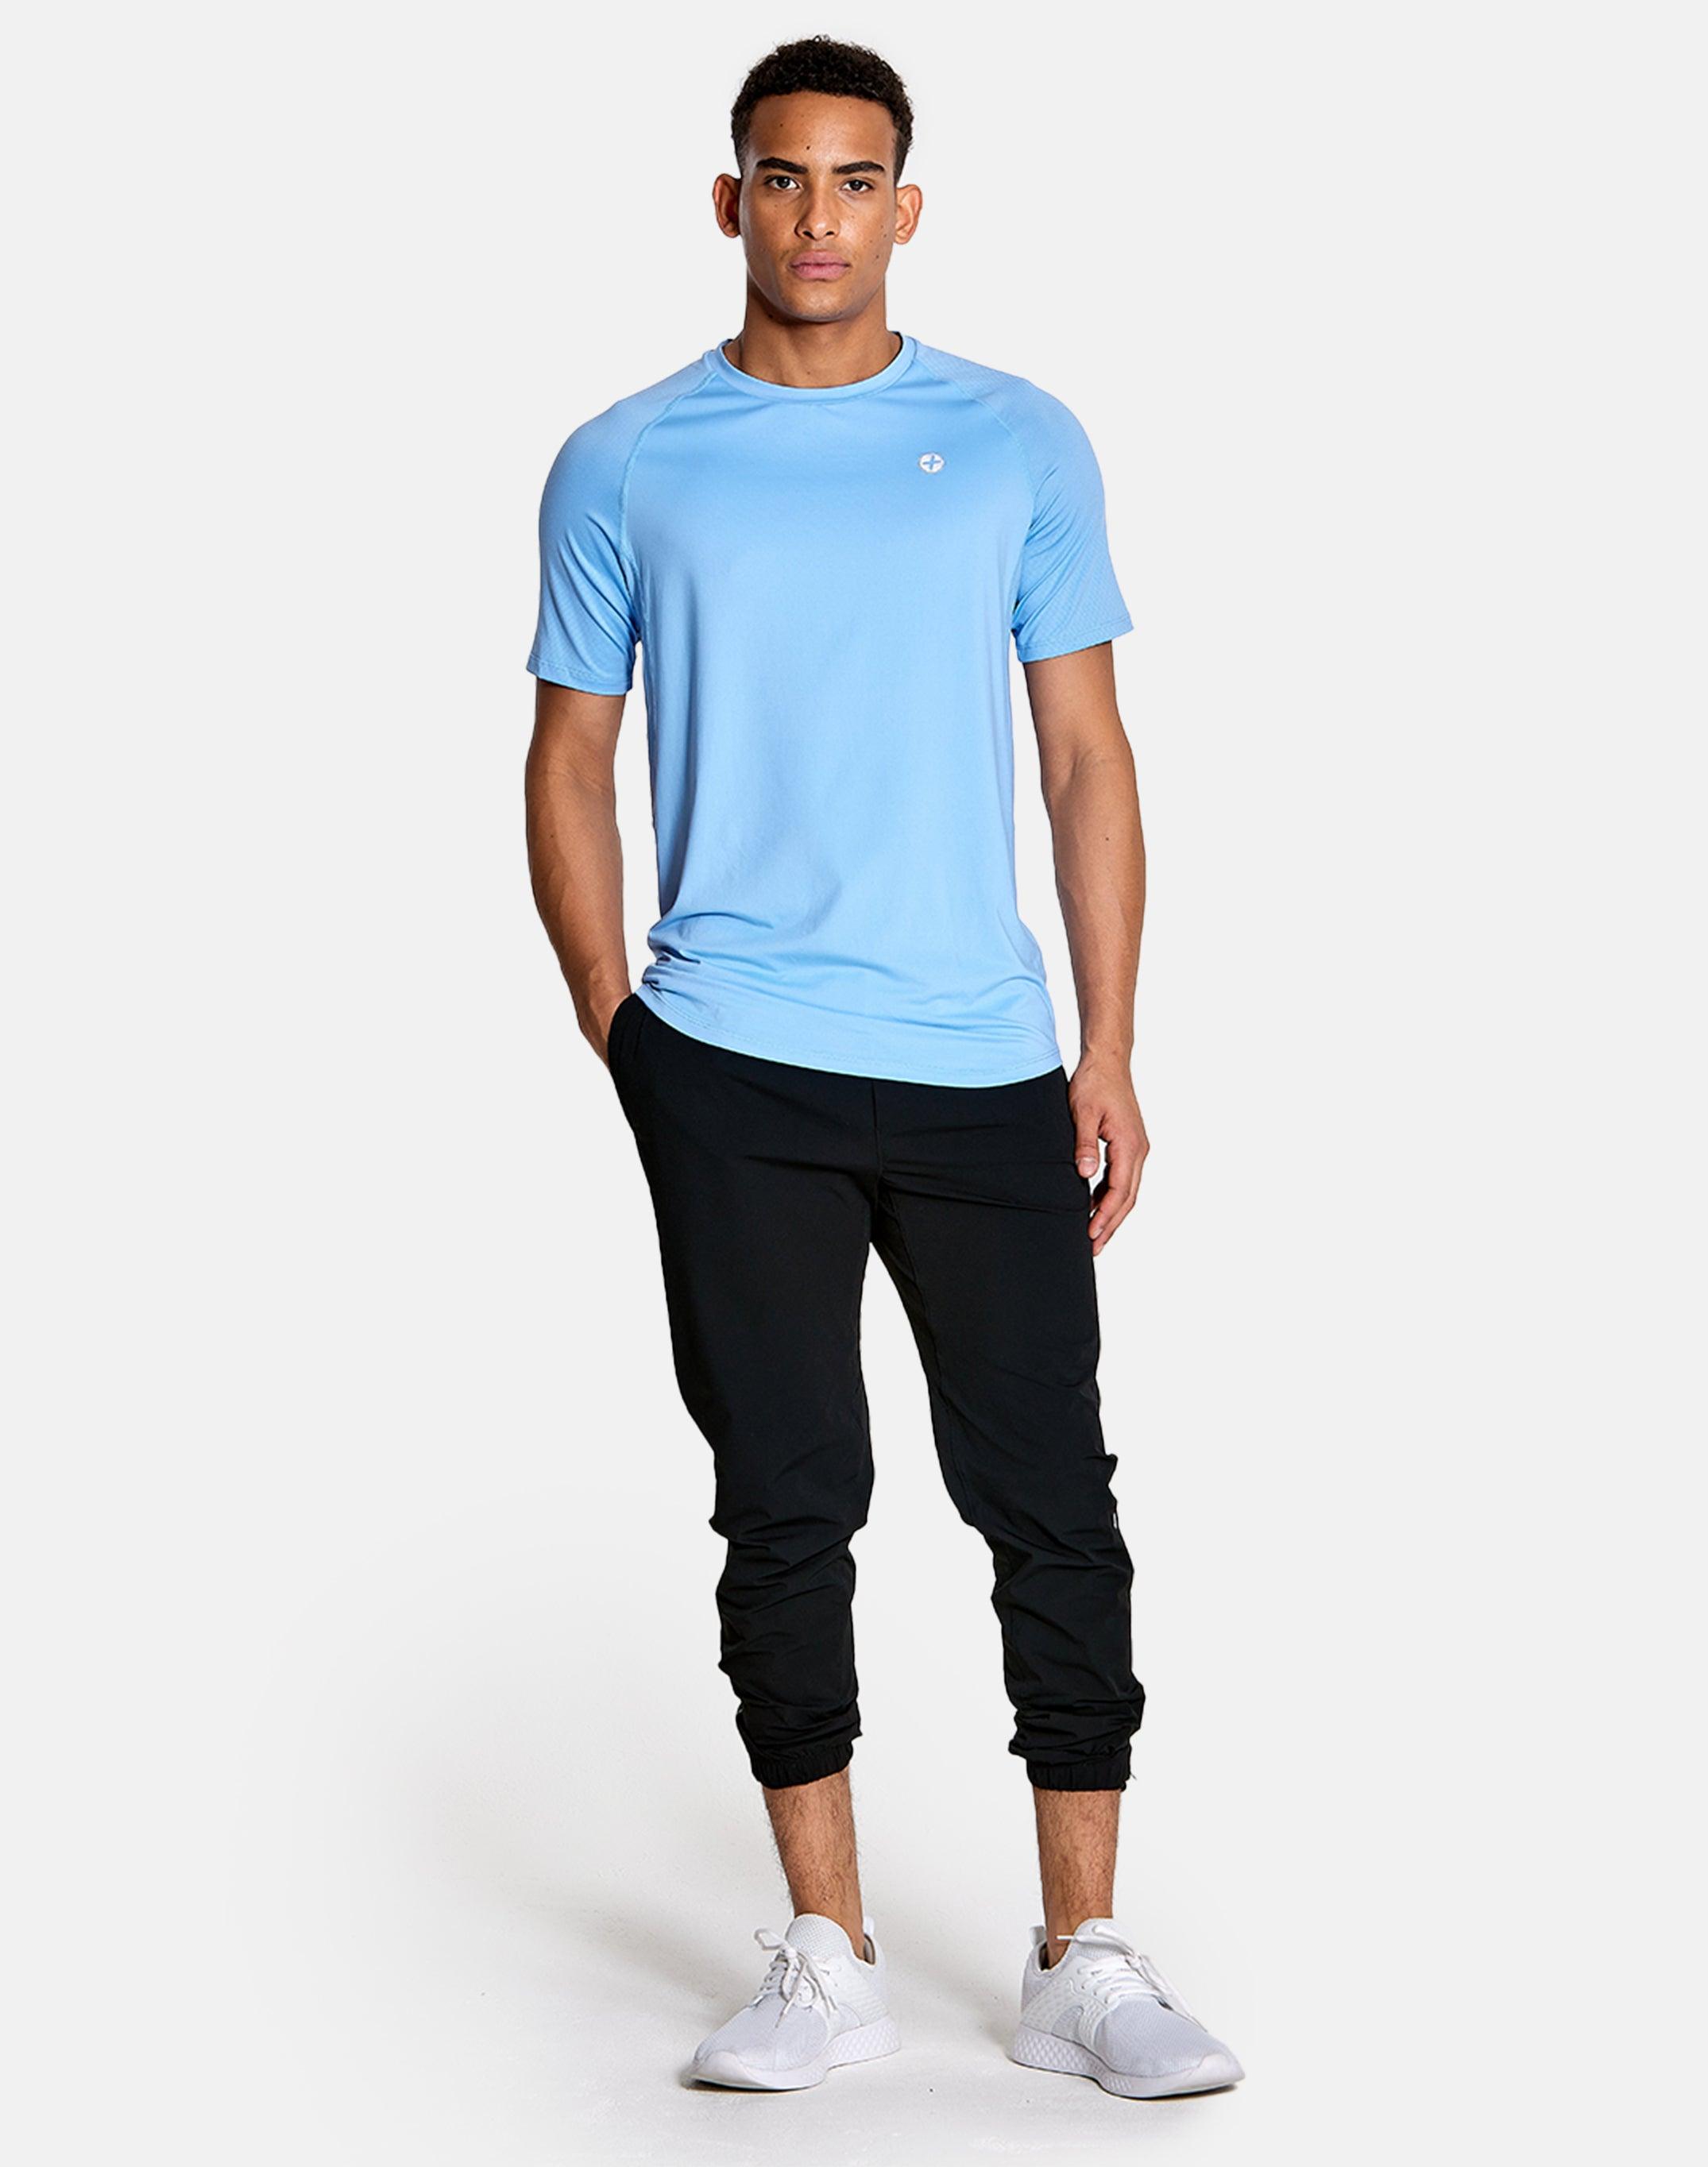 Surge Tee in Blue - T-Shirts - Gym+Coffee IE